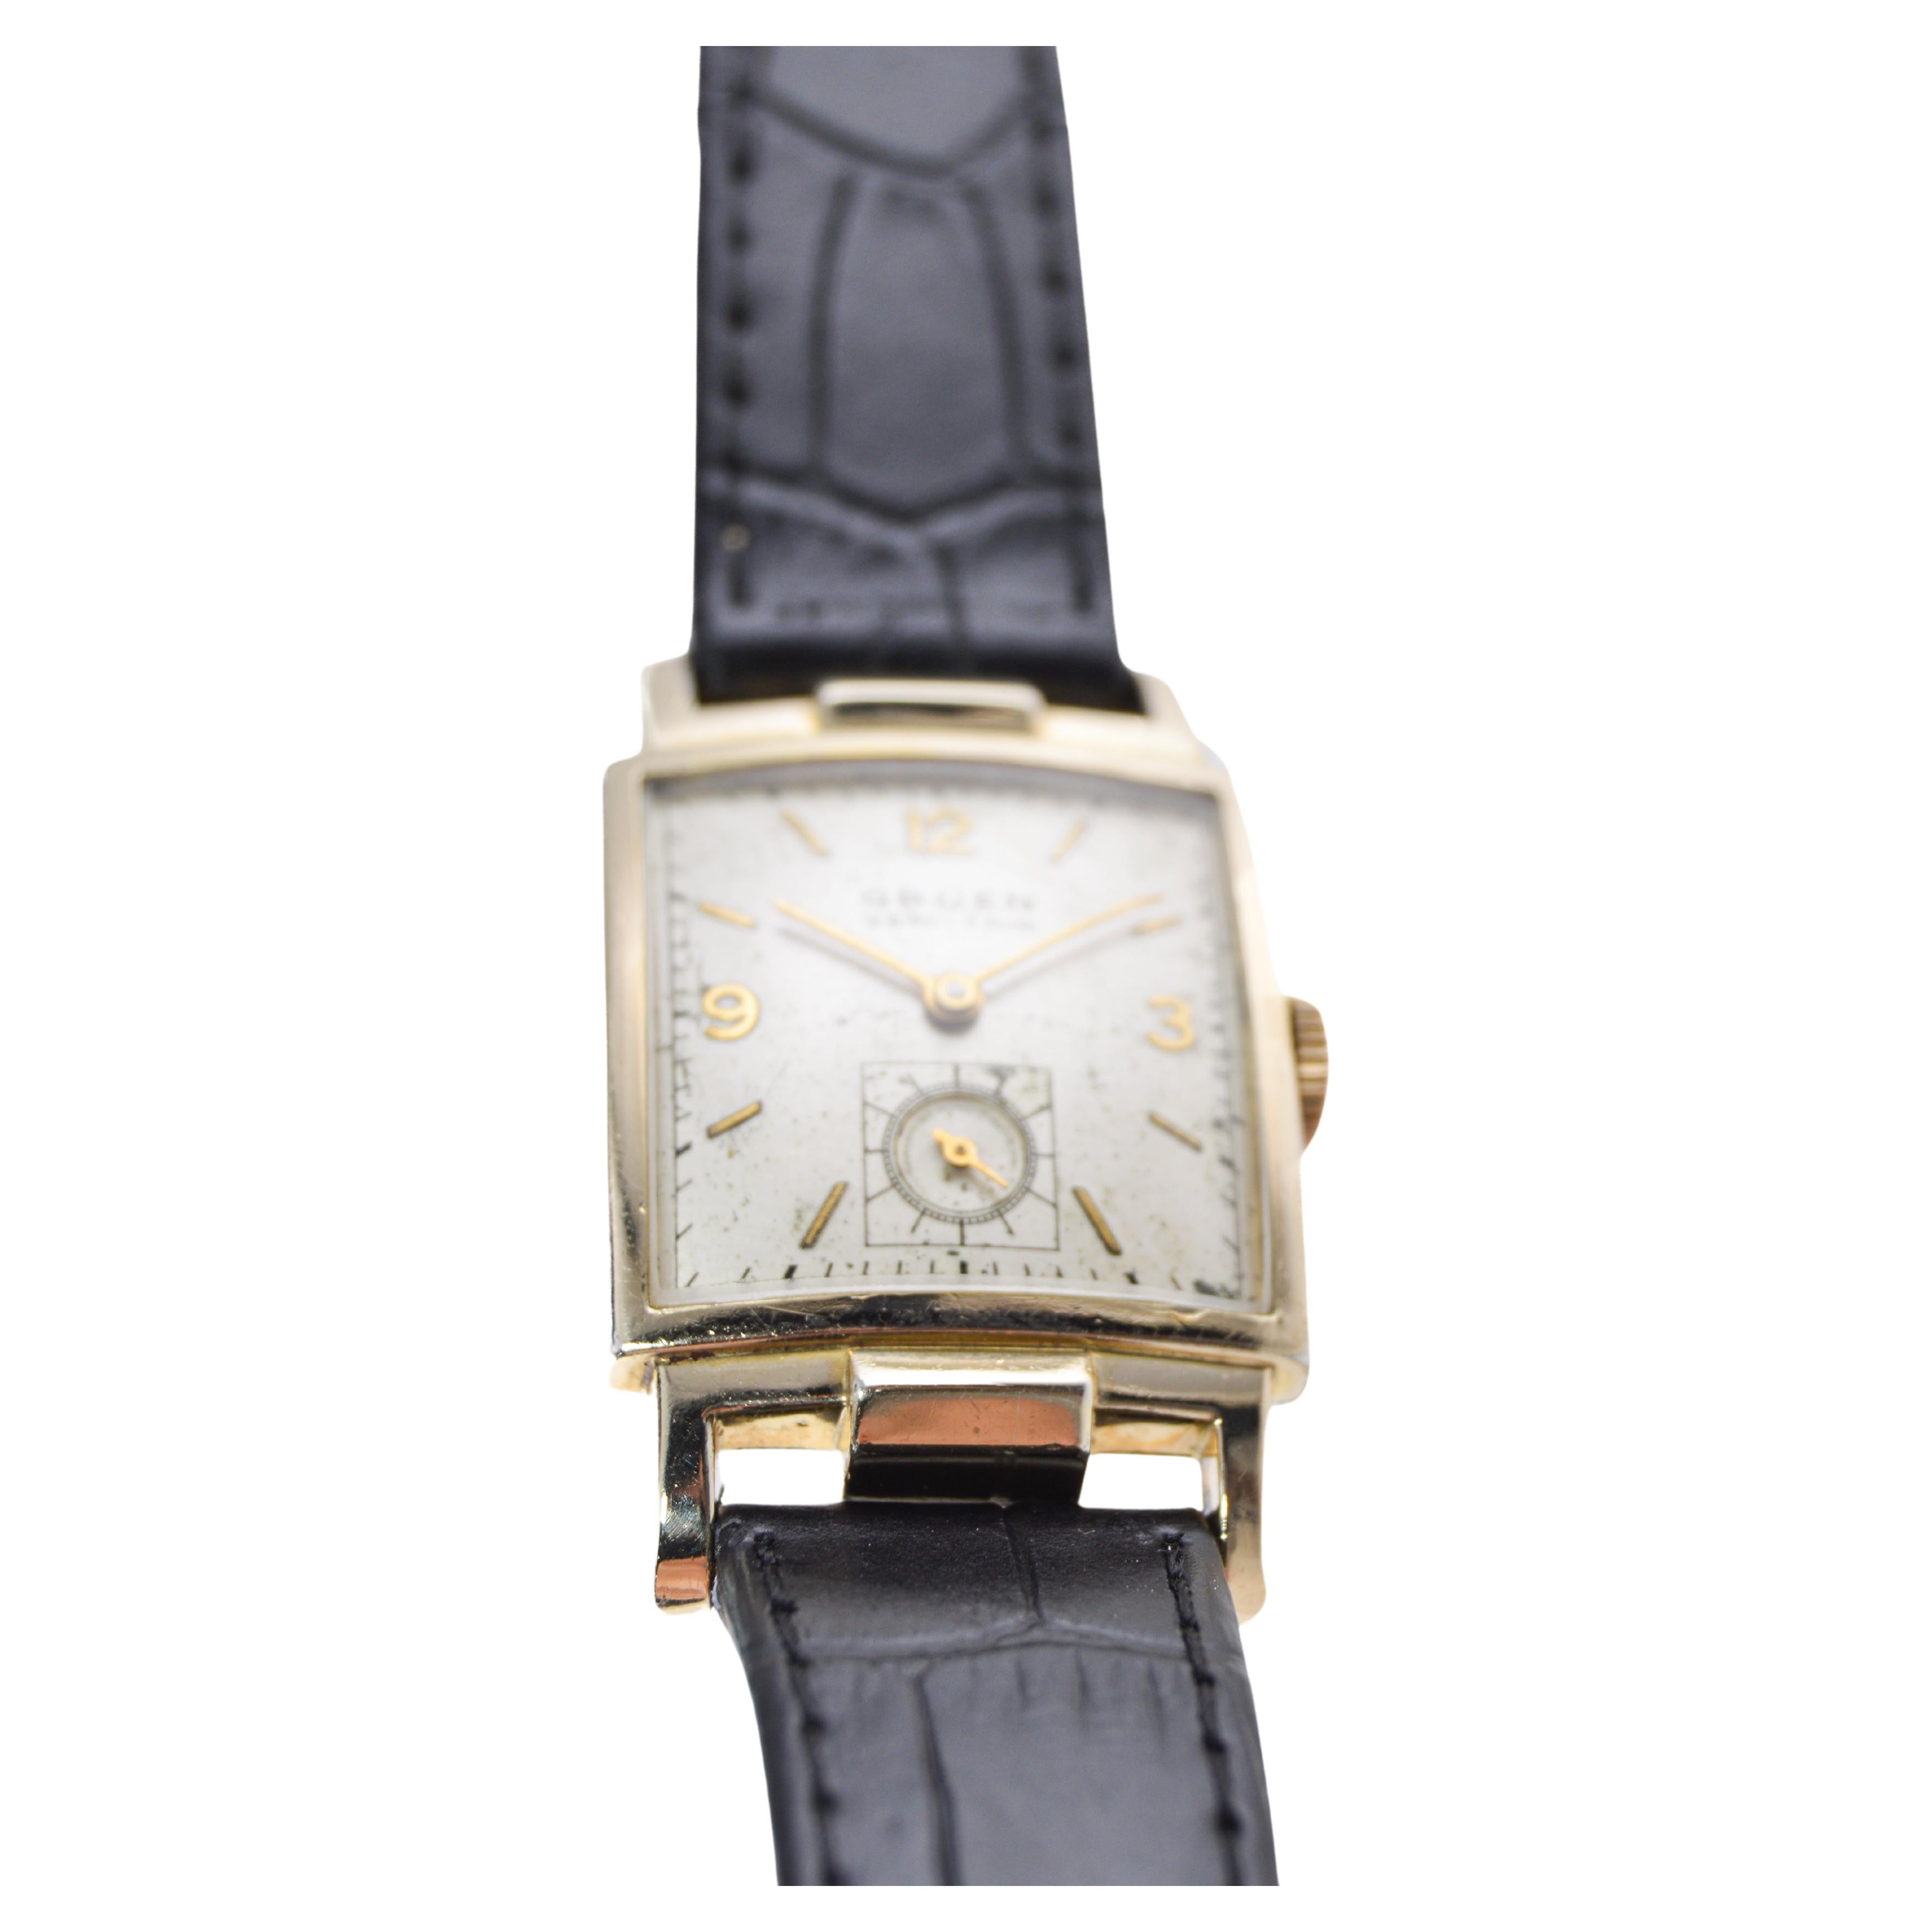 Gruen Yellow Gold Art Deco Tank Style watch with Original Dial from 1940's For Sale 4